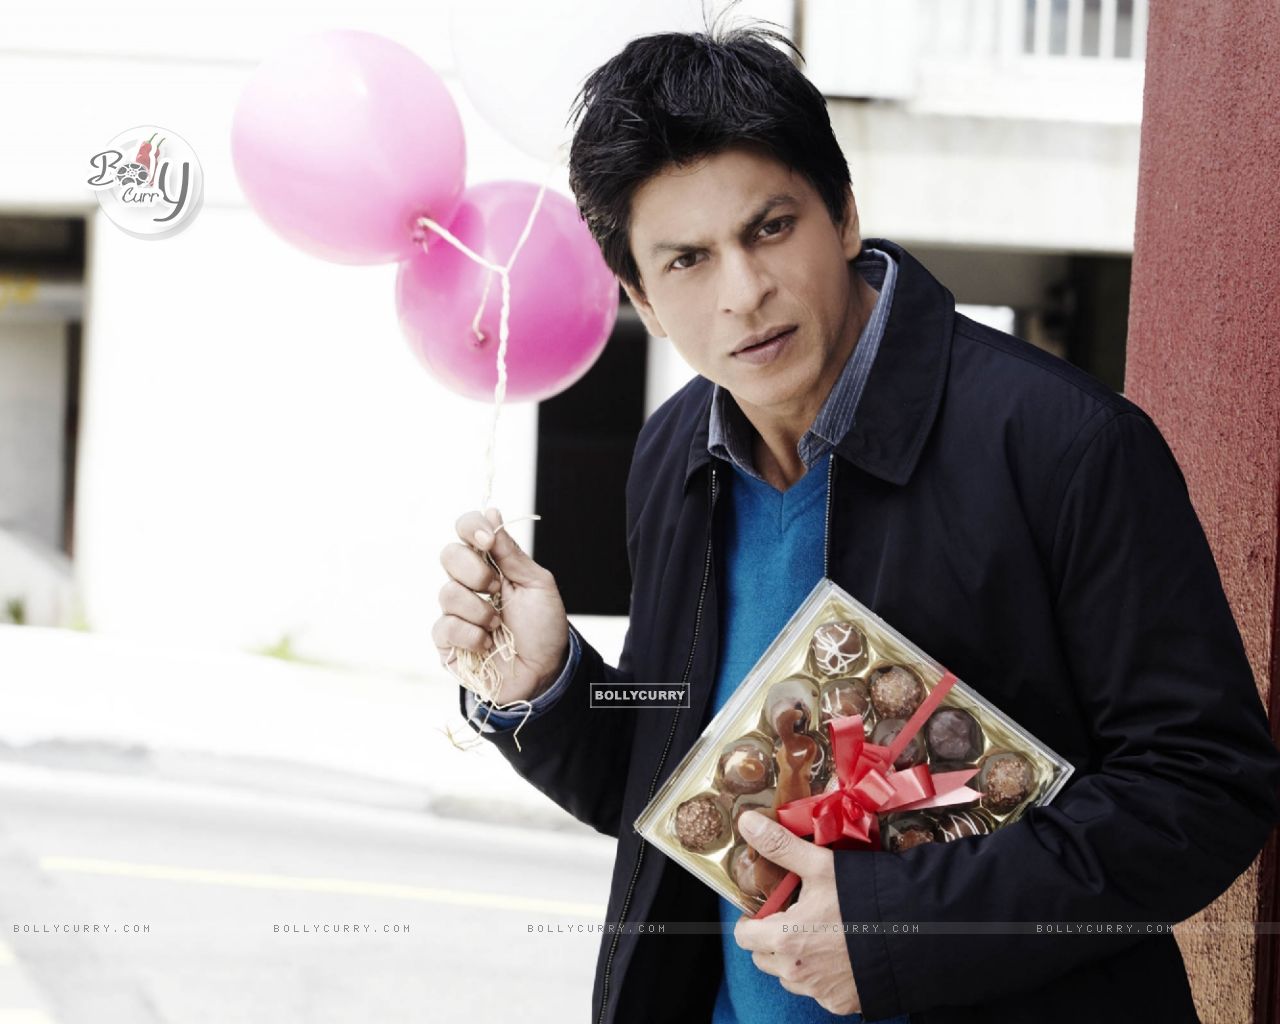 http://img.bollycurry.com/wallpapers/1280x1024/40295-shahrukh-khan-in-the-movie-my-name-is-khan.jpg